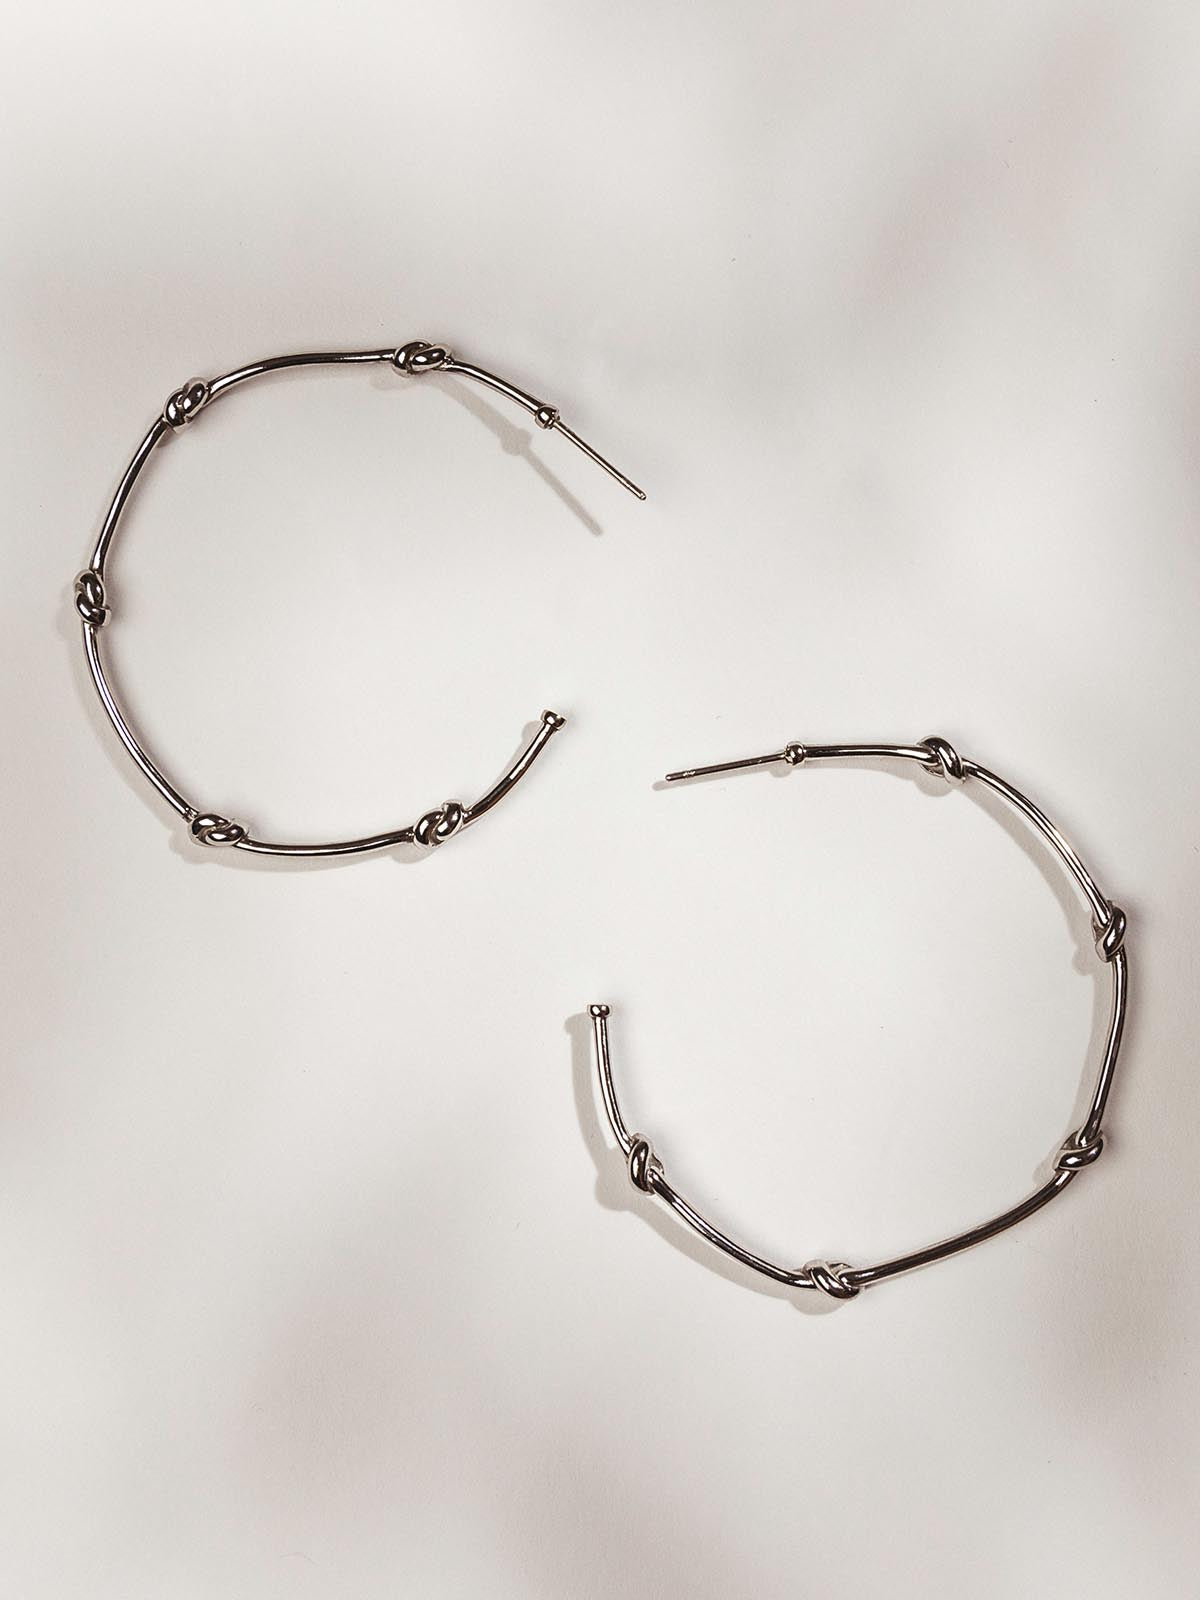 Hoop earrings on a white surface with knots  in the earrings.